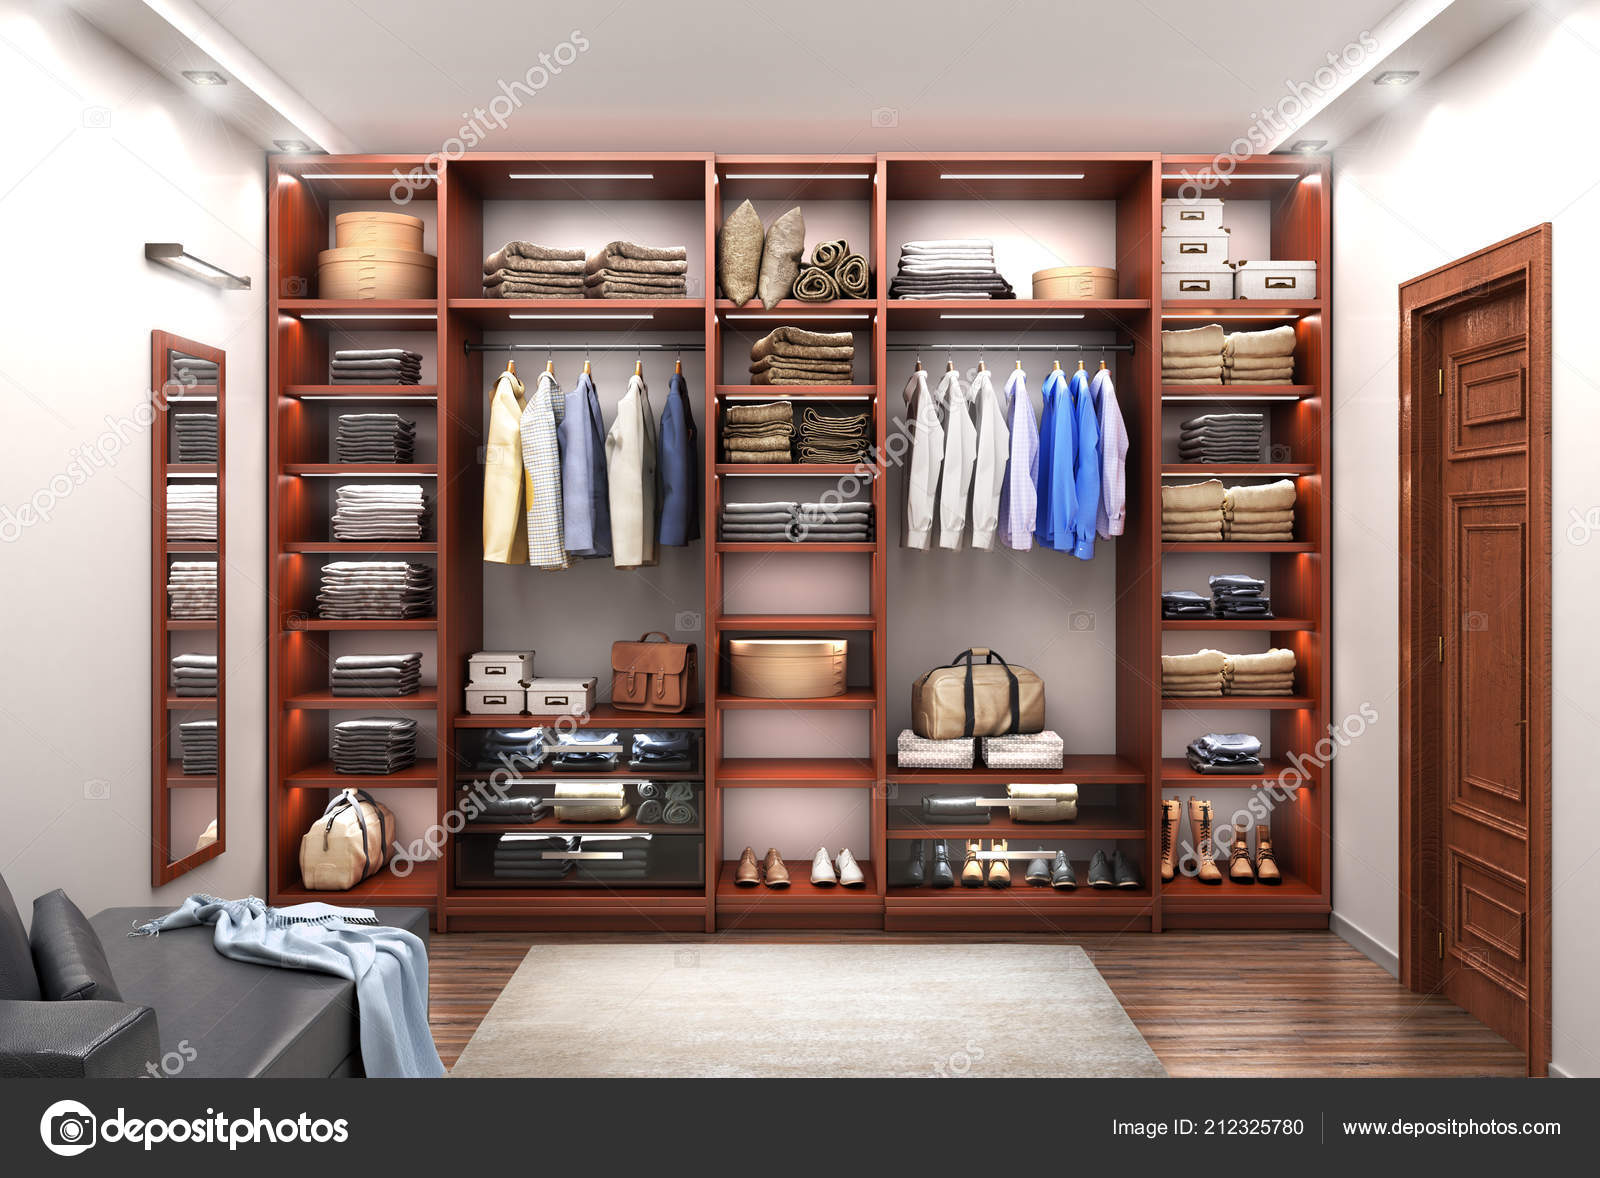 Men Wardrobe Room Illustration Modern Wooden Cabinet Clothes Hanging Rails Stock Photo C Urfingus 212325780,Modern House Designs Pictures Gallery In India